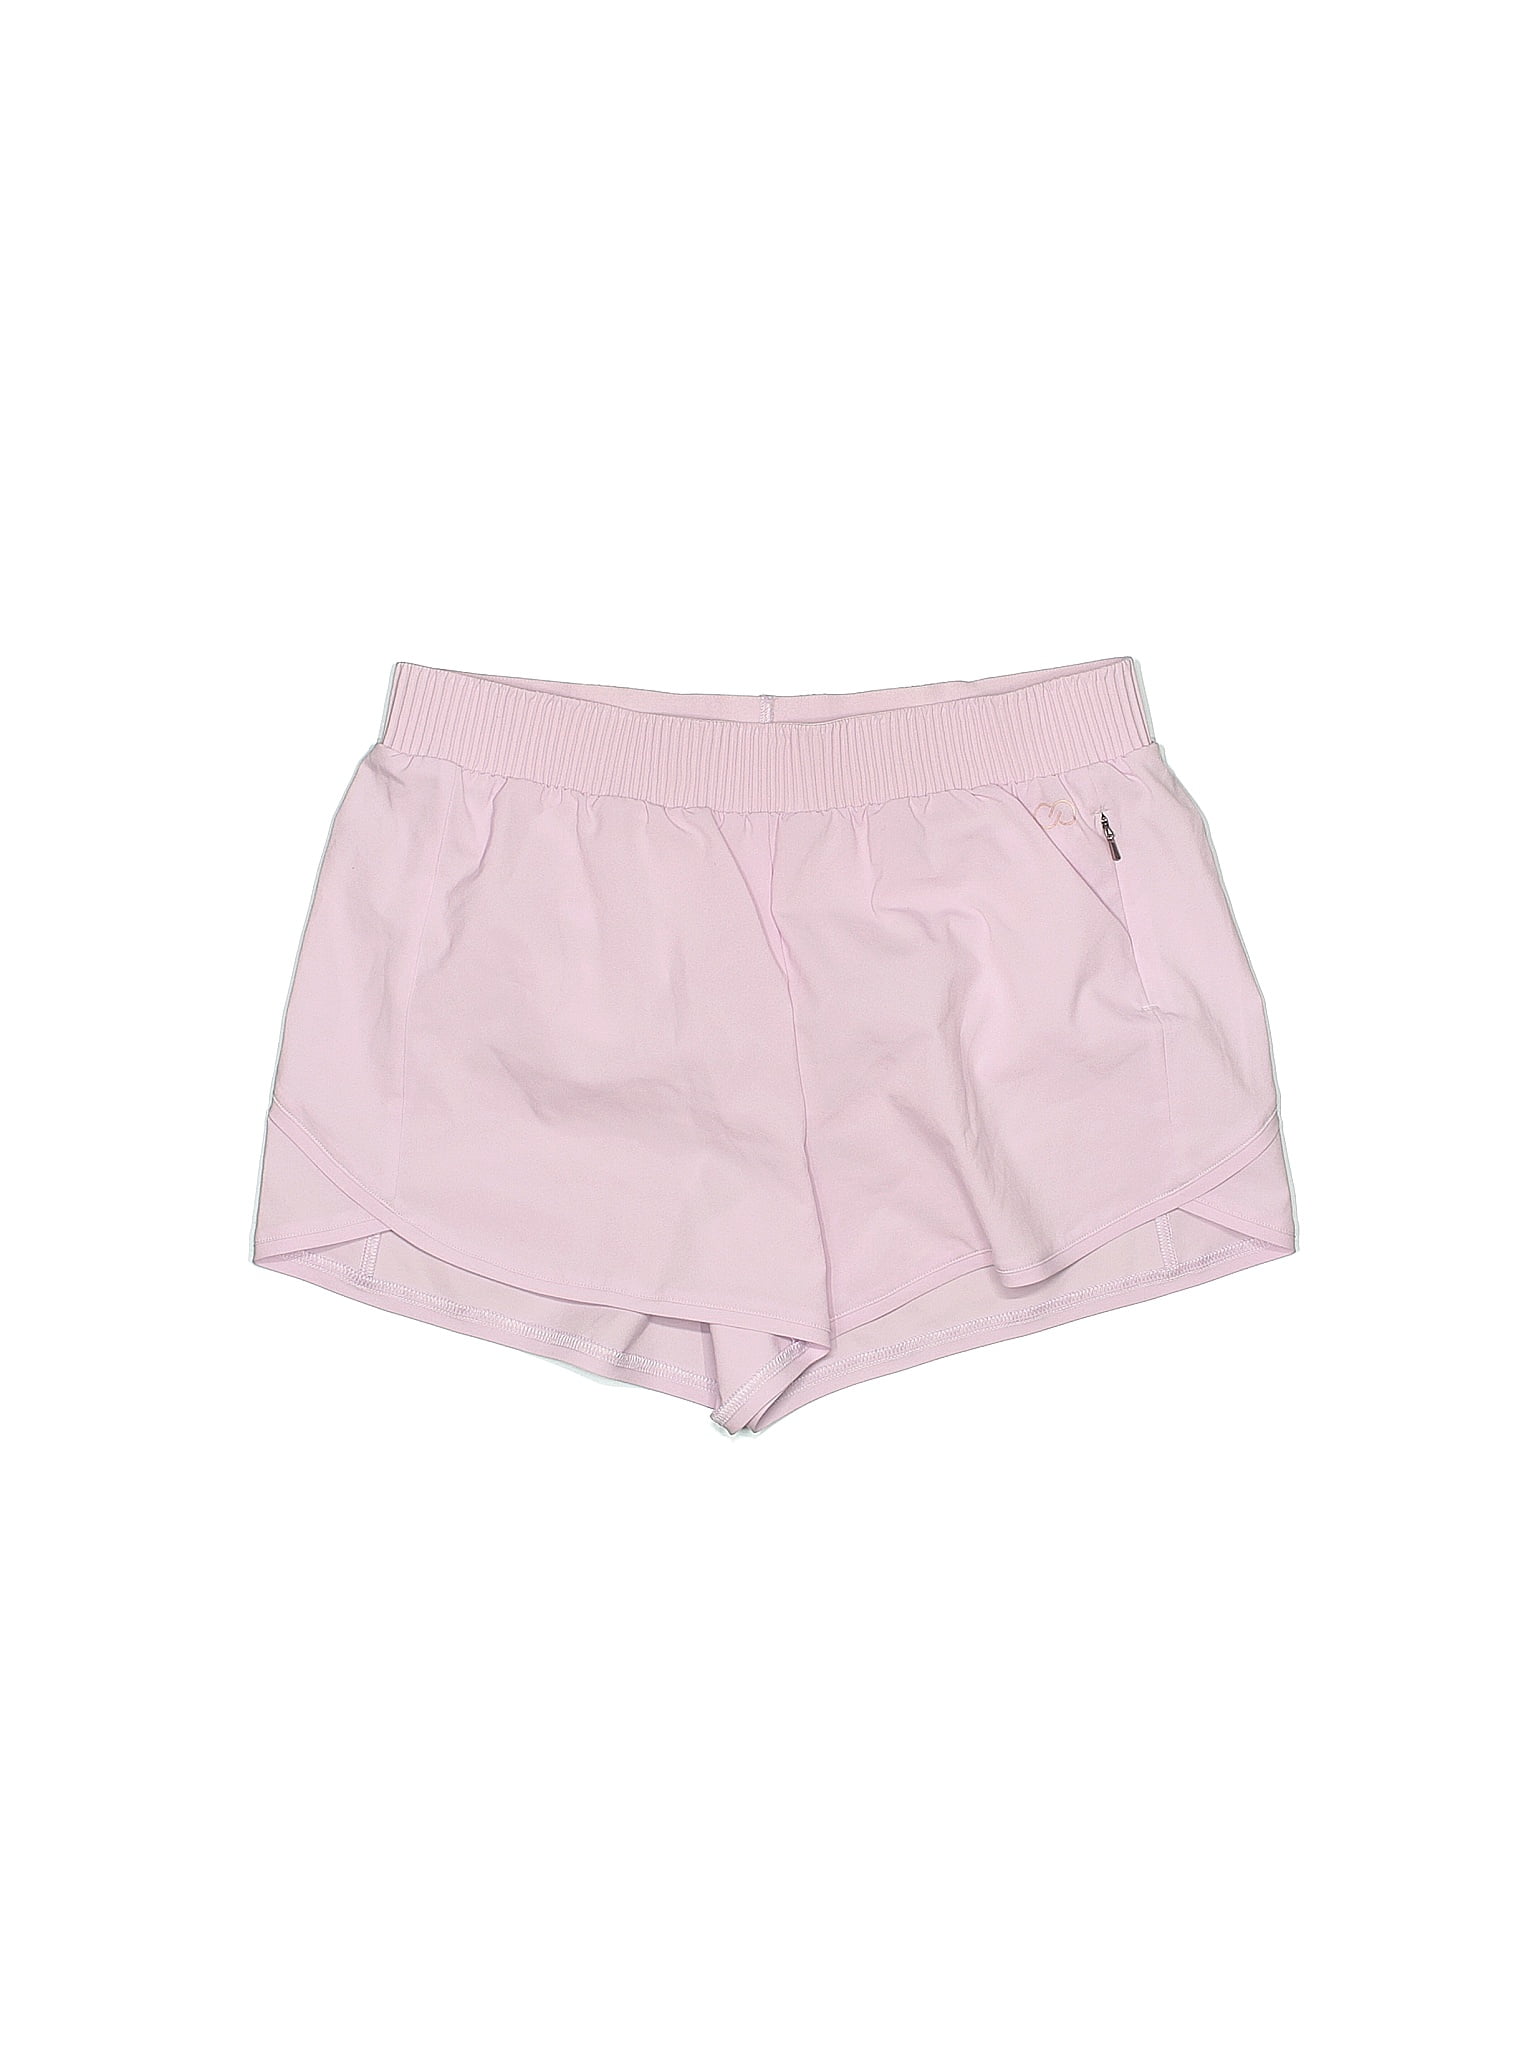 Calia by Carrie Underwood 100% Polyester Solid Pink Athletic Shorts ...